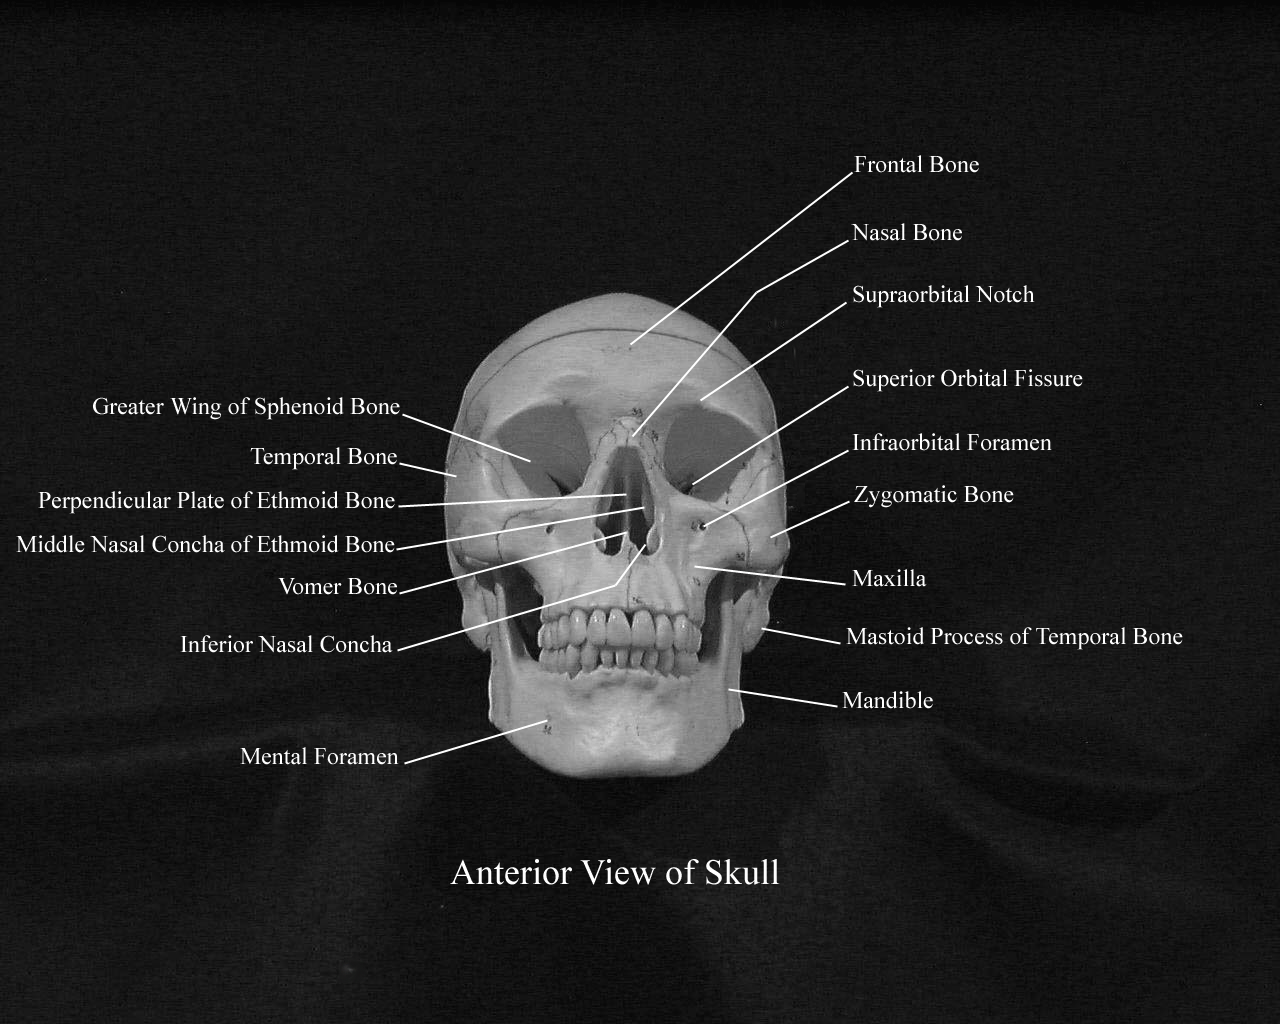 alabeld picture of the skull from an anterior view